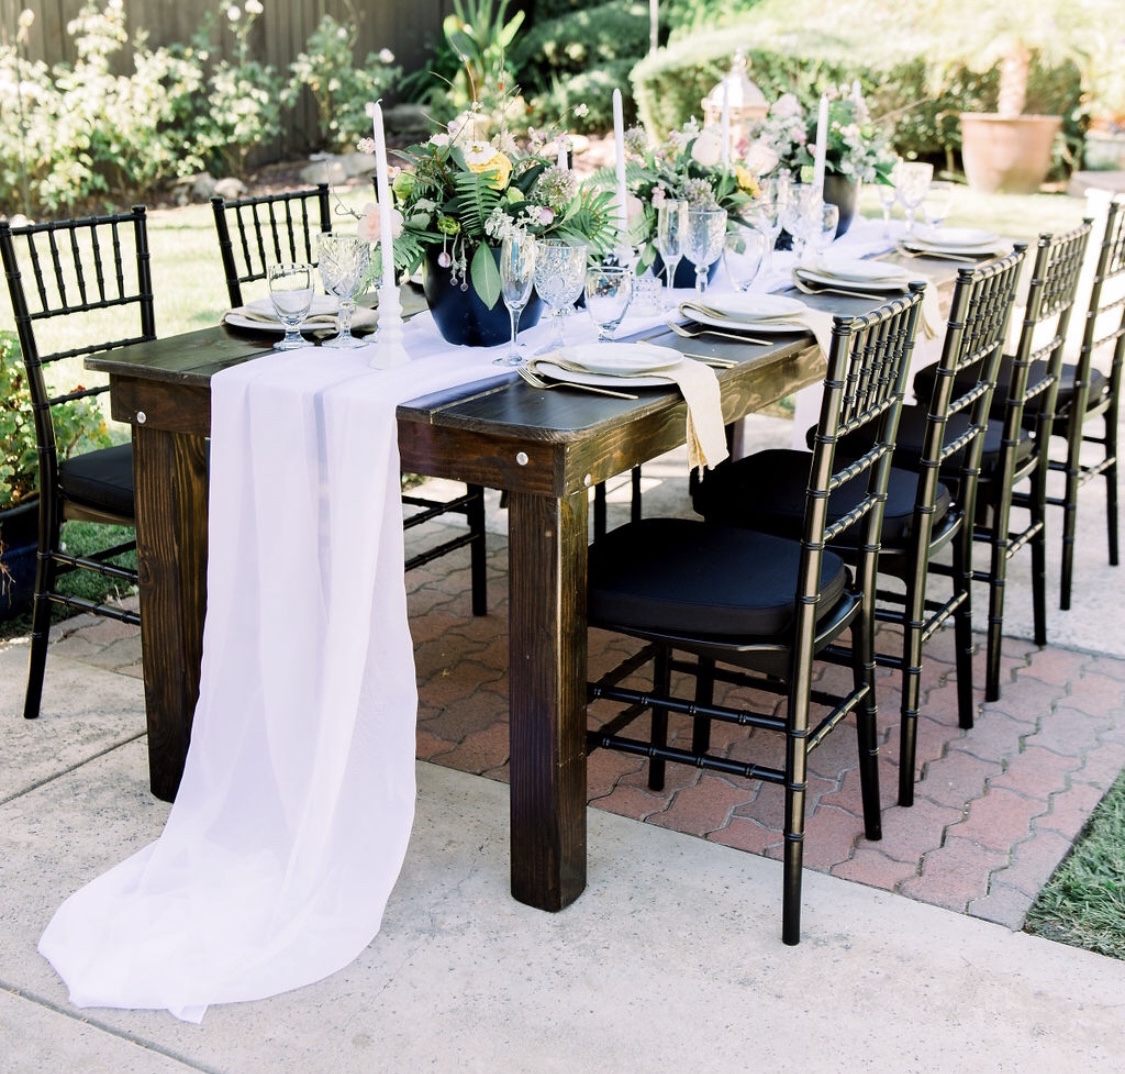 Party & Event Rental - Chairs Tables - Canopy Tent Draping - Throne Chairs  - Los Angeles Party Rentals